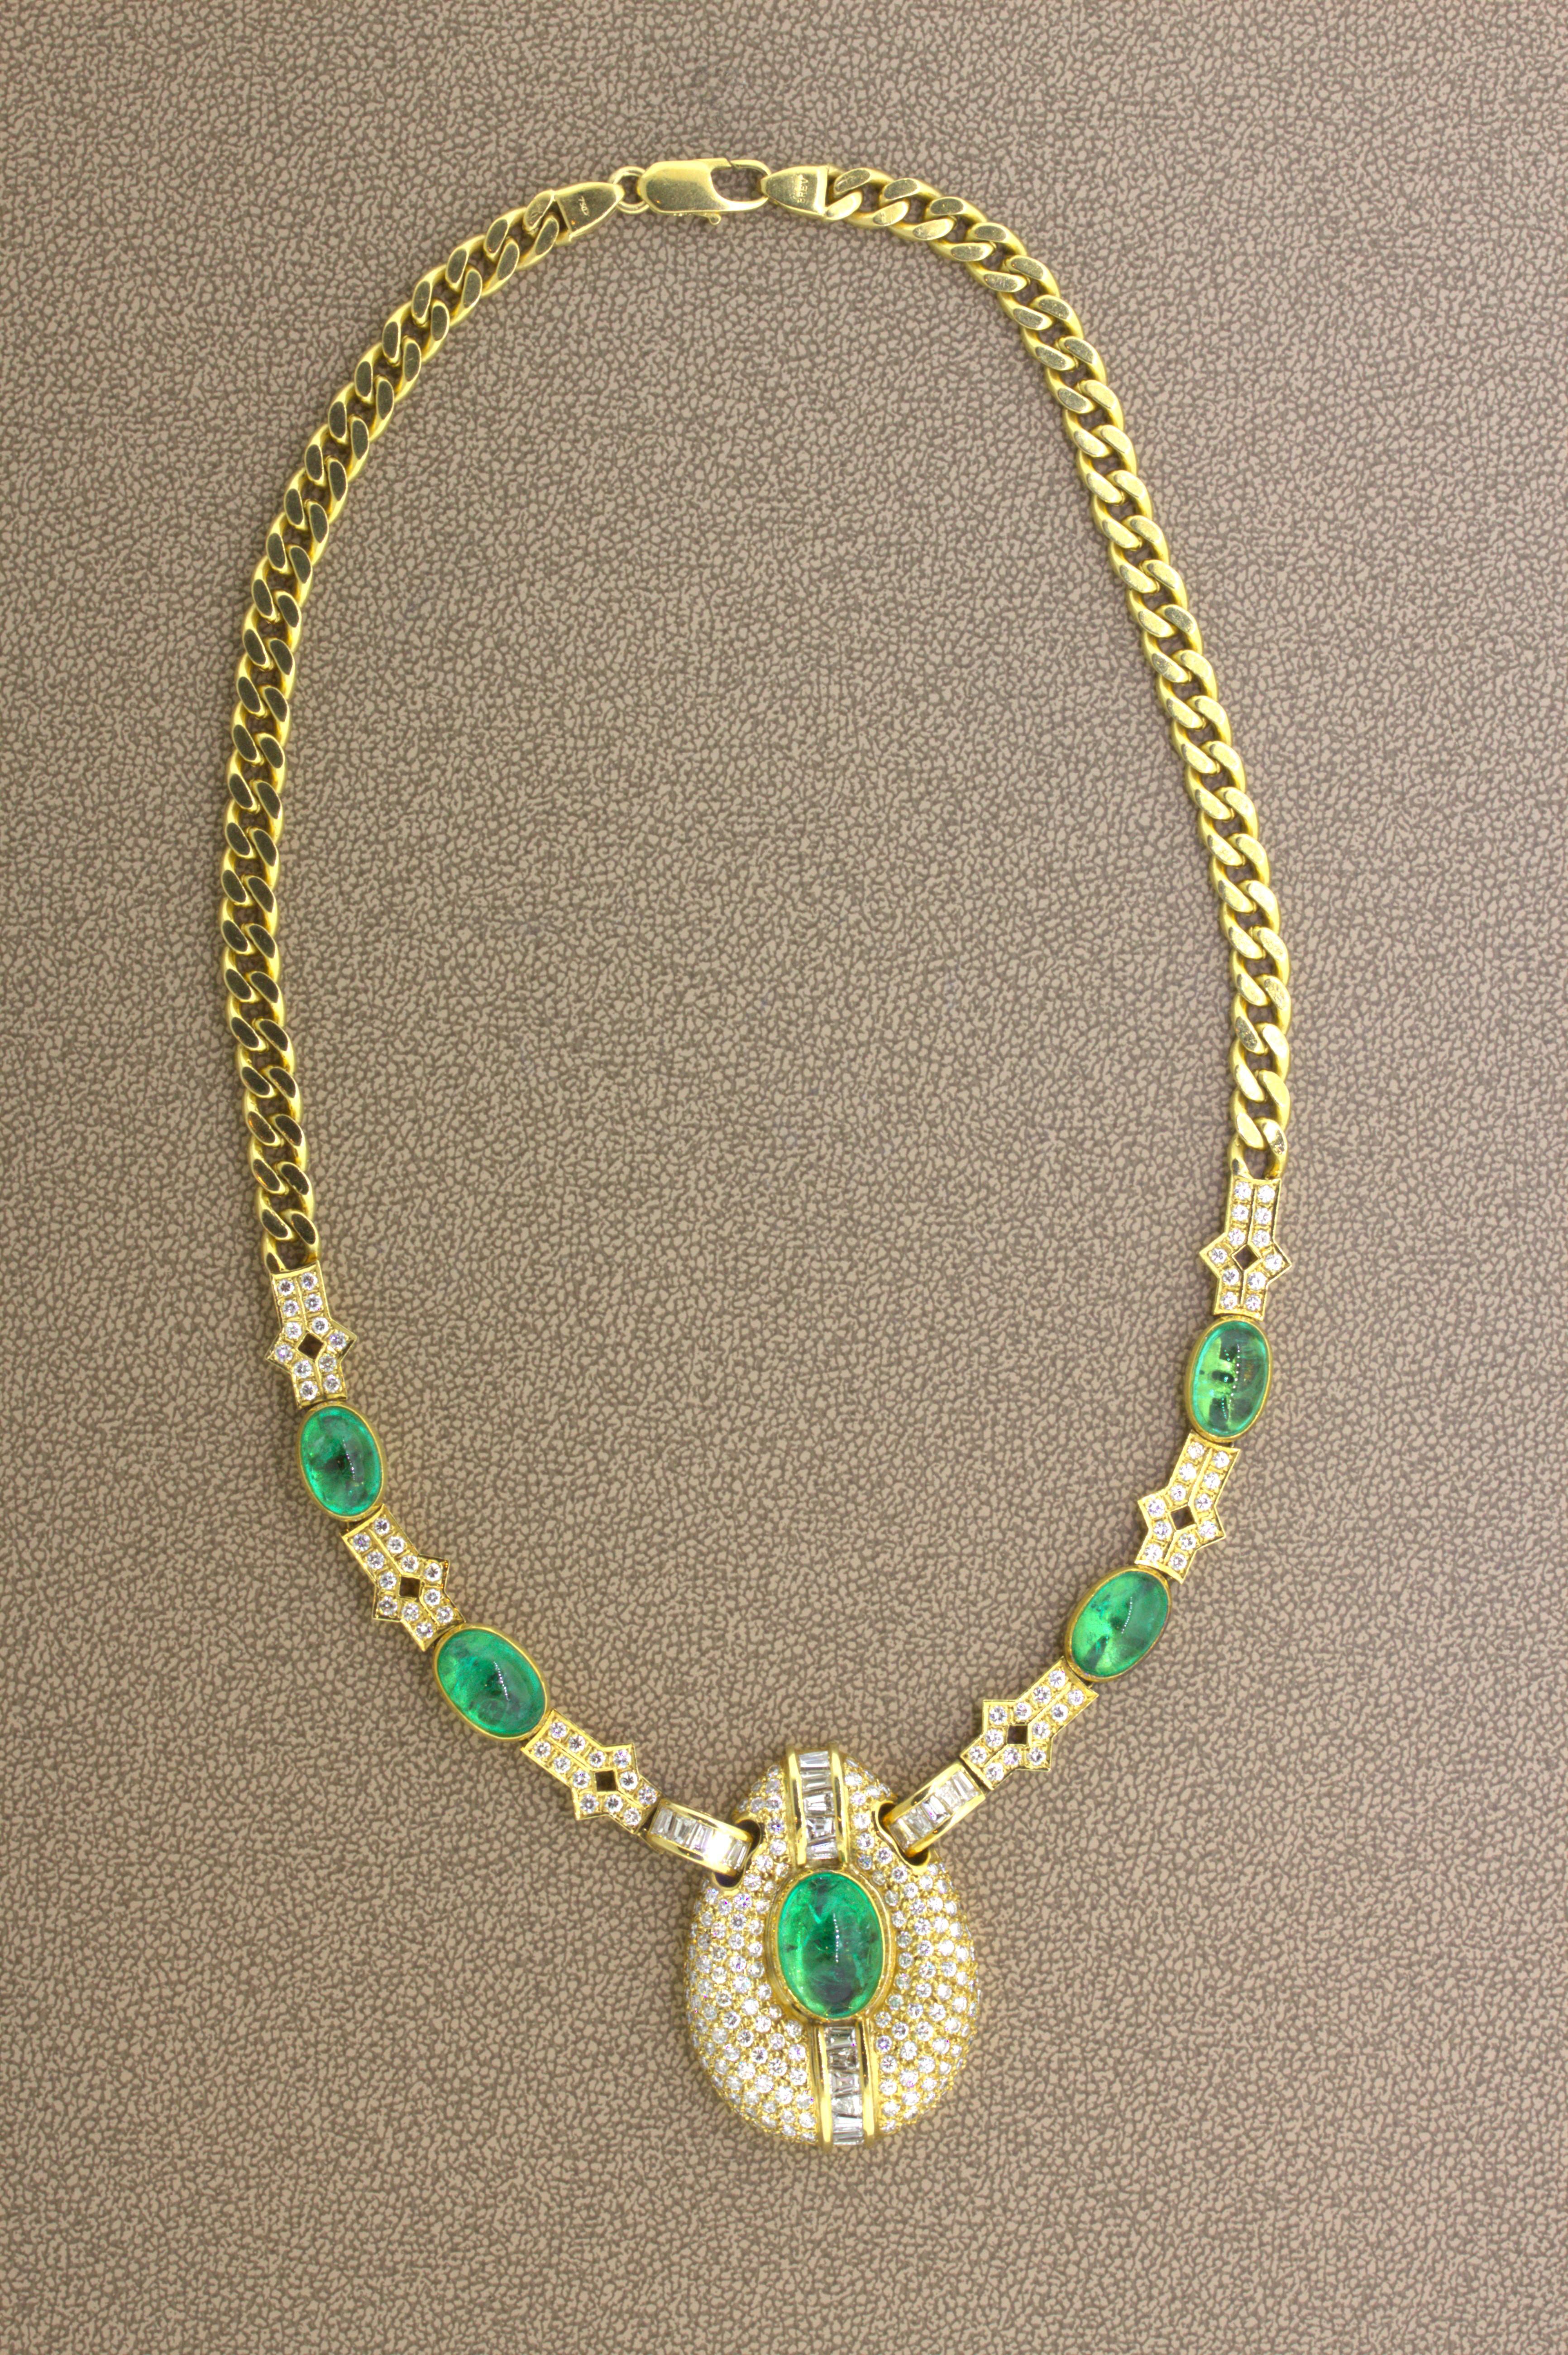 A lovely diamond and emerald necklace made in 18k yellow gold. It features 5 cabochon emeralds with a bright jelly green color weighing a total of 15 carats. Adding to that, are 8 carats of round brilliant and baguette-cut diamonds set around the